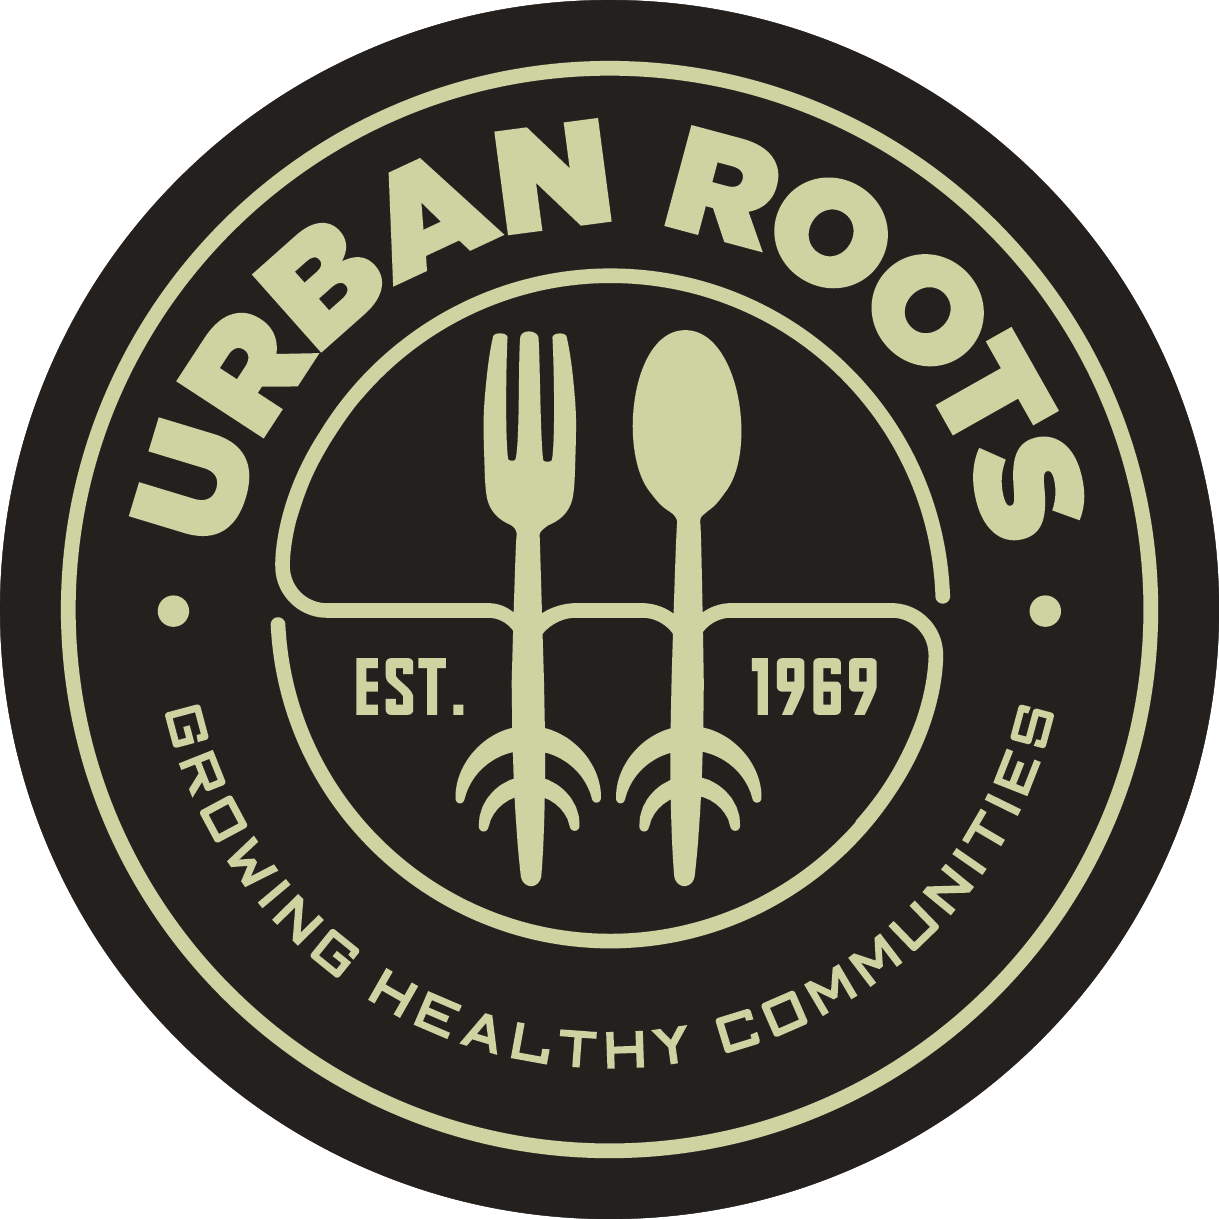 Event Promo Photo For Urban Roots - Mobile Farmers Market Grand Opening